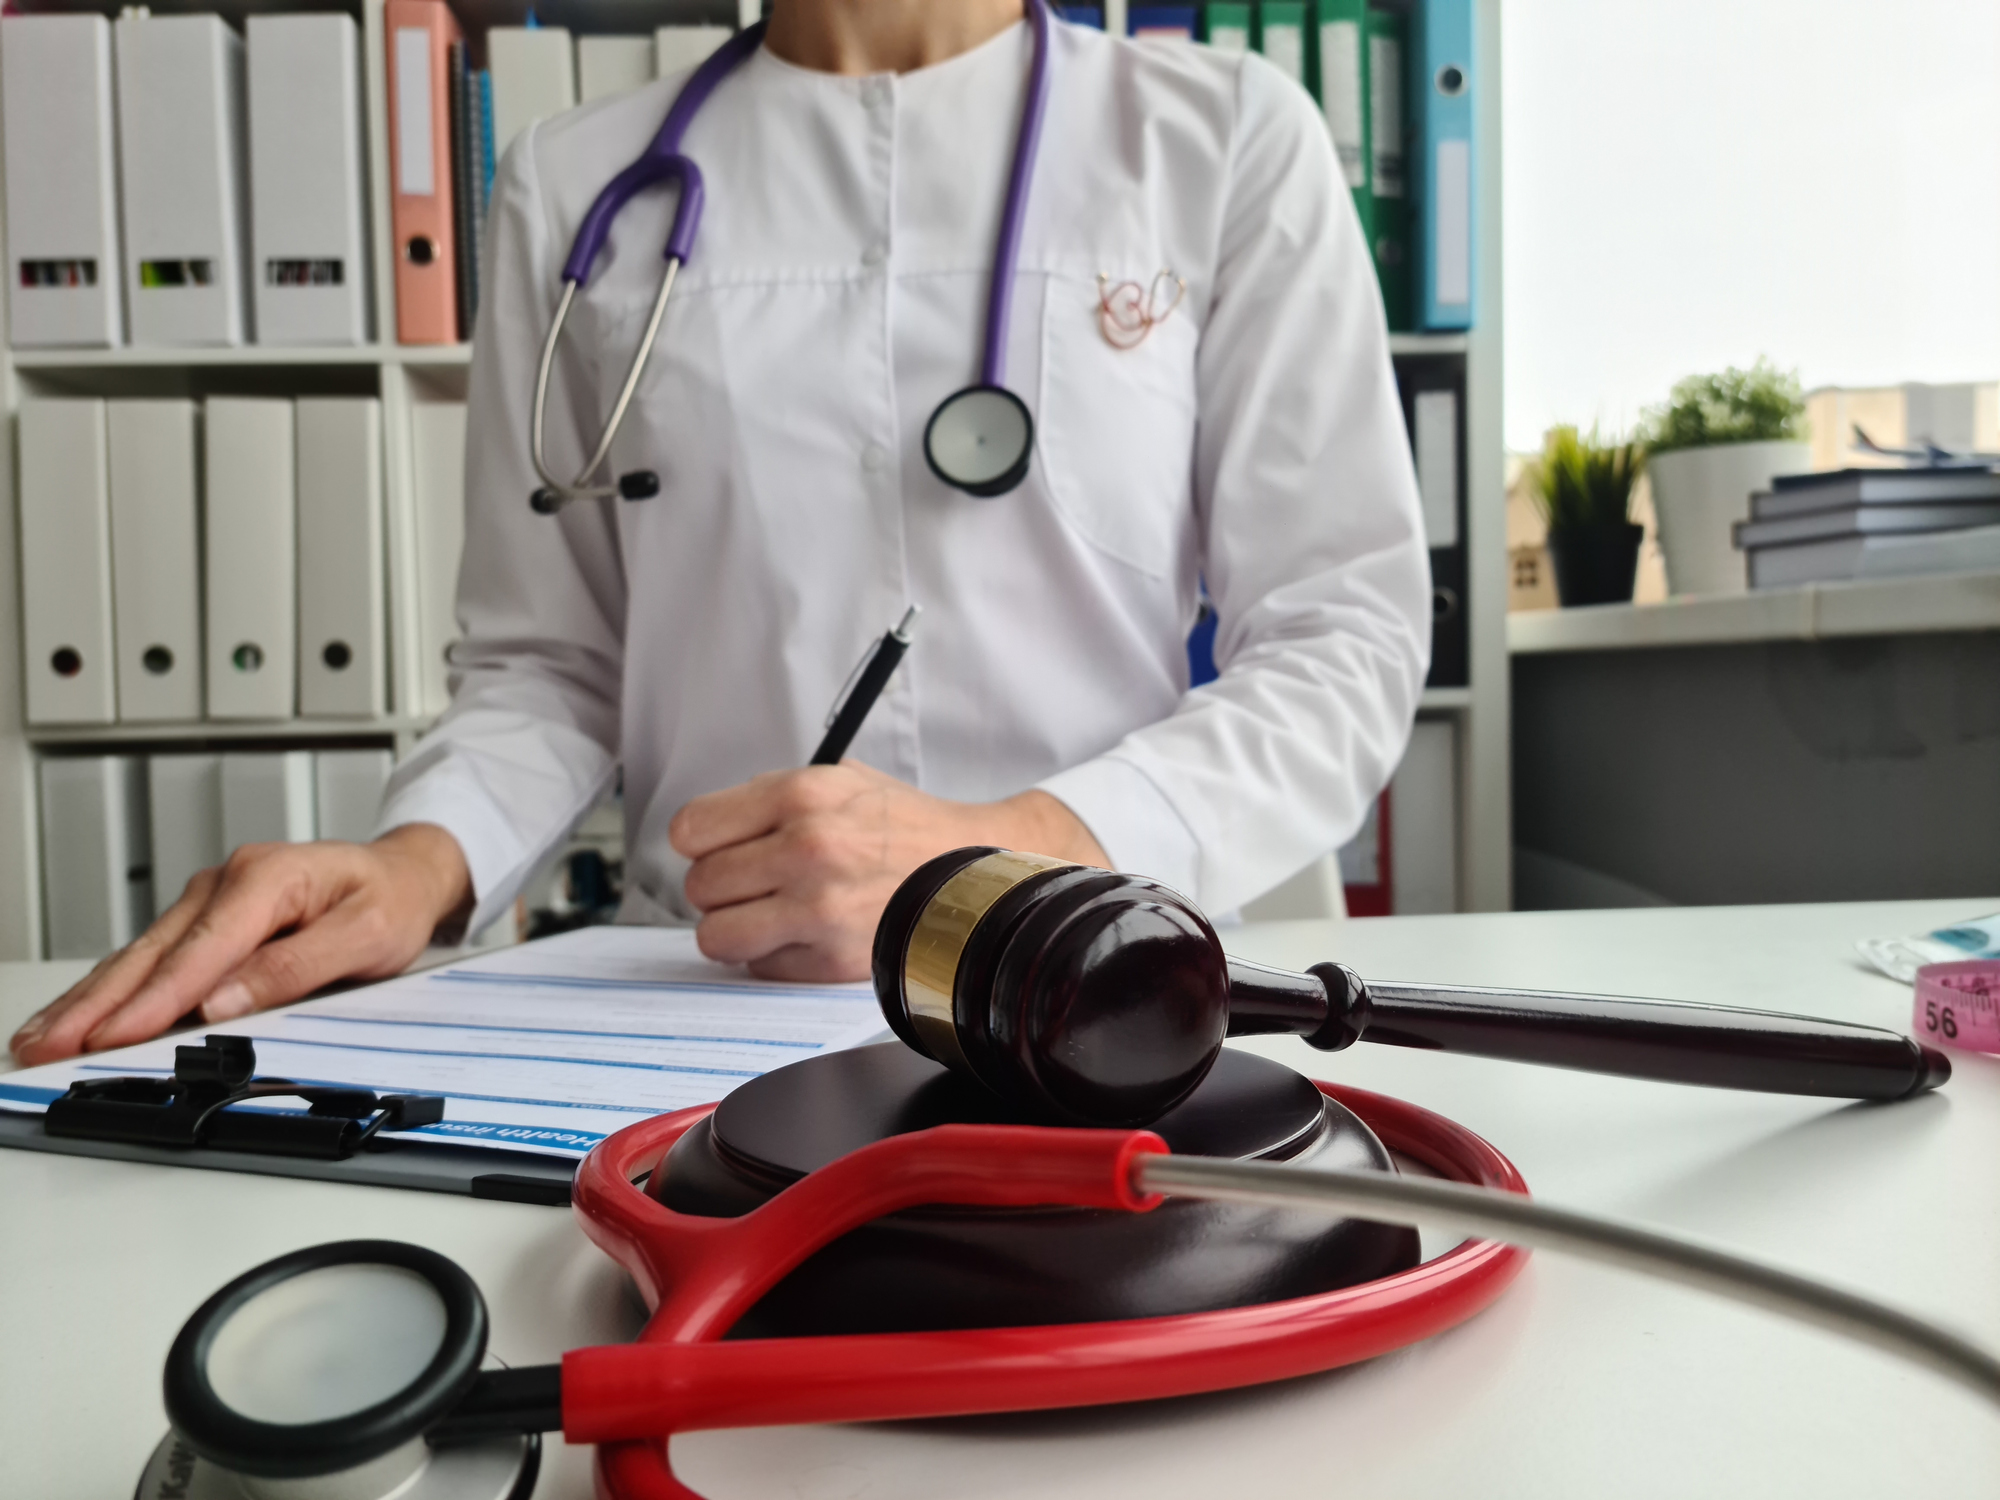 Medical Malpractice Injuries and Fatalities in Texas